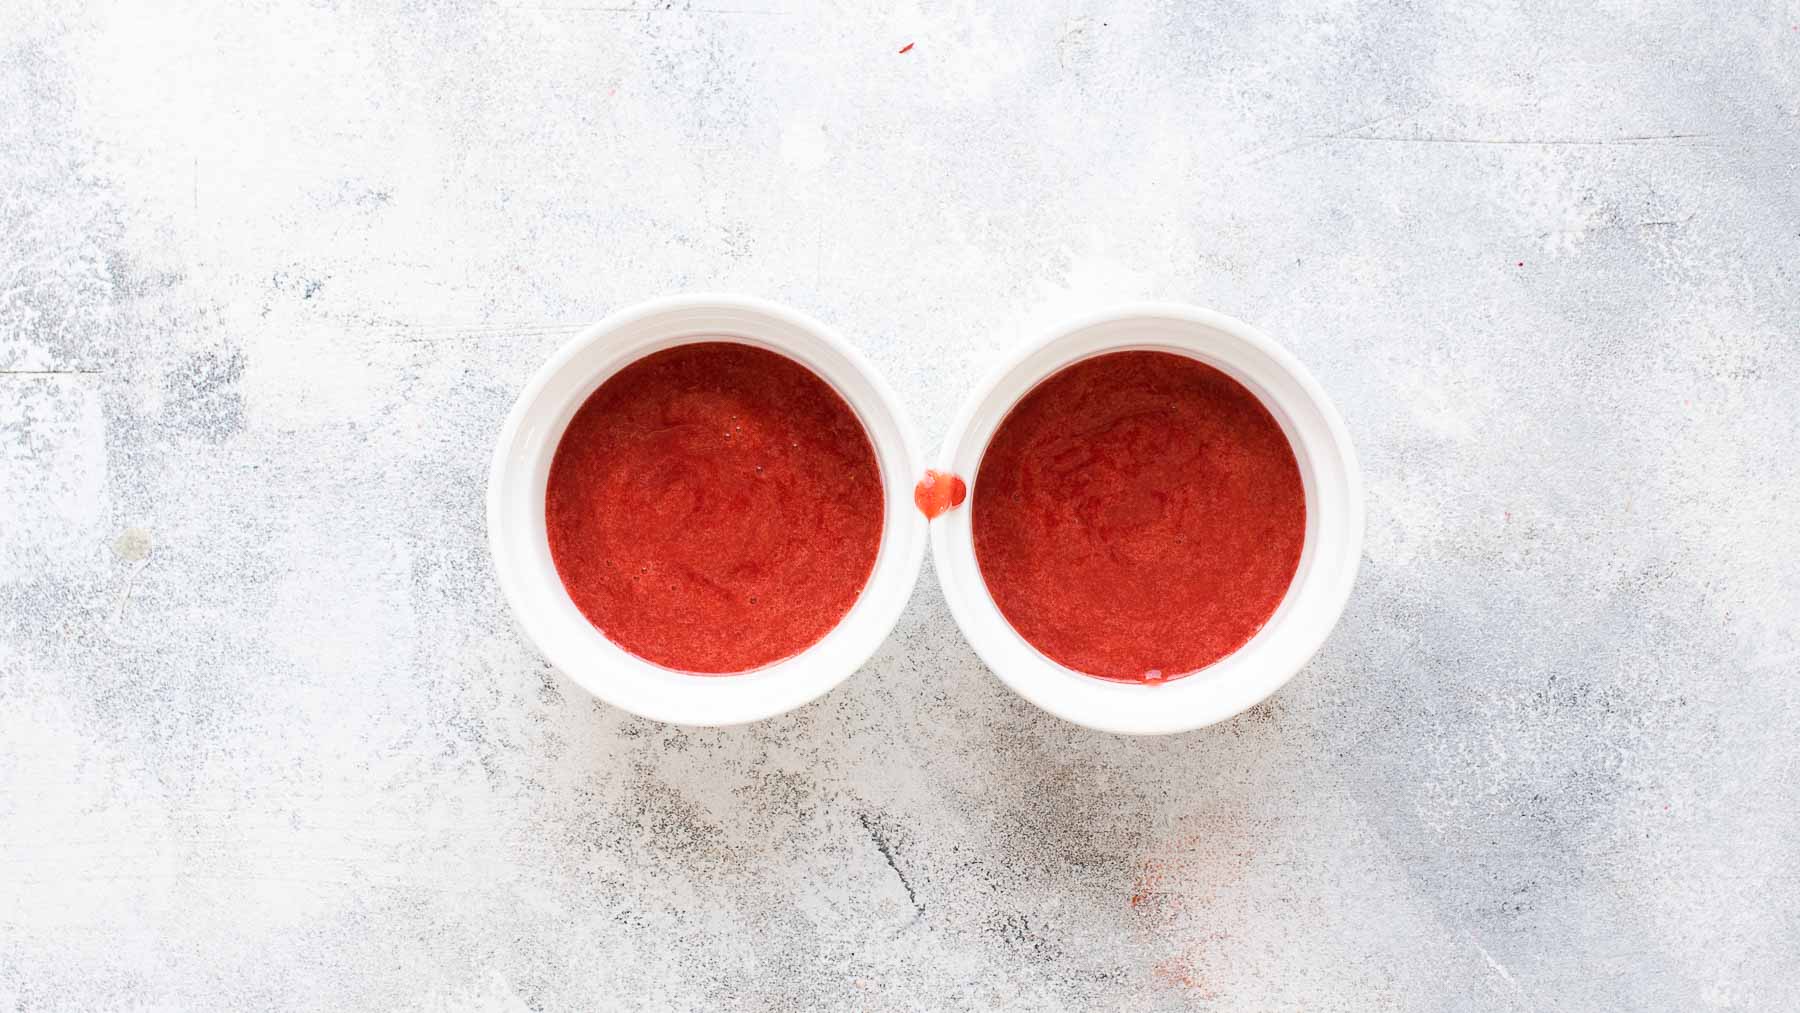 strawberry sauce in two ramekins next to each other